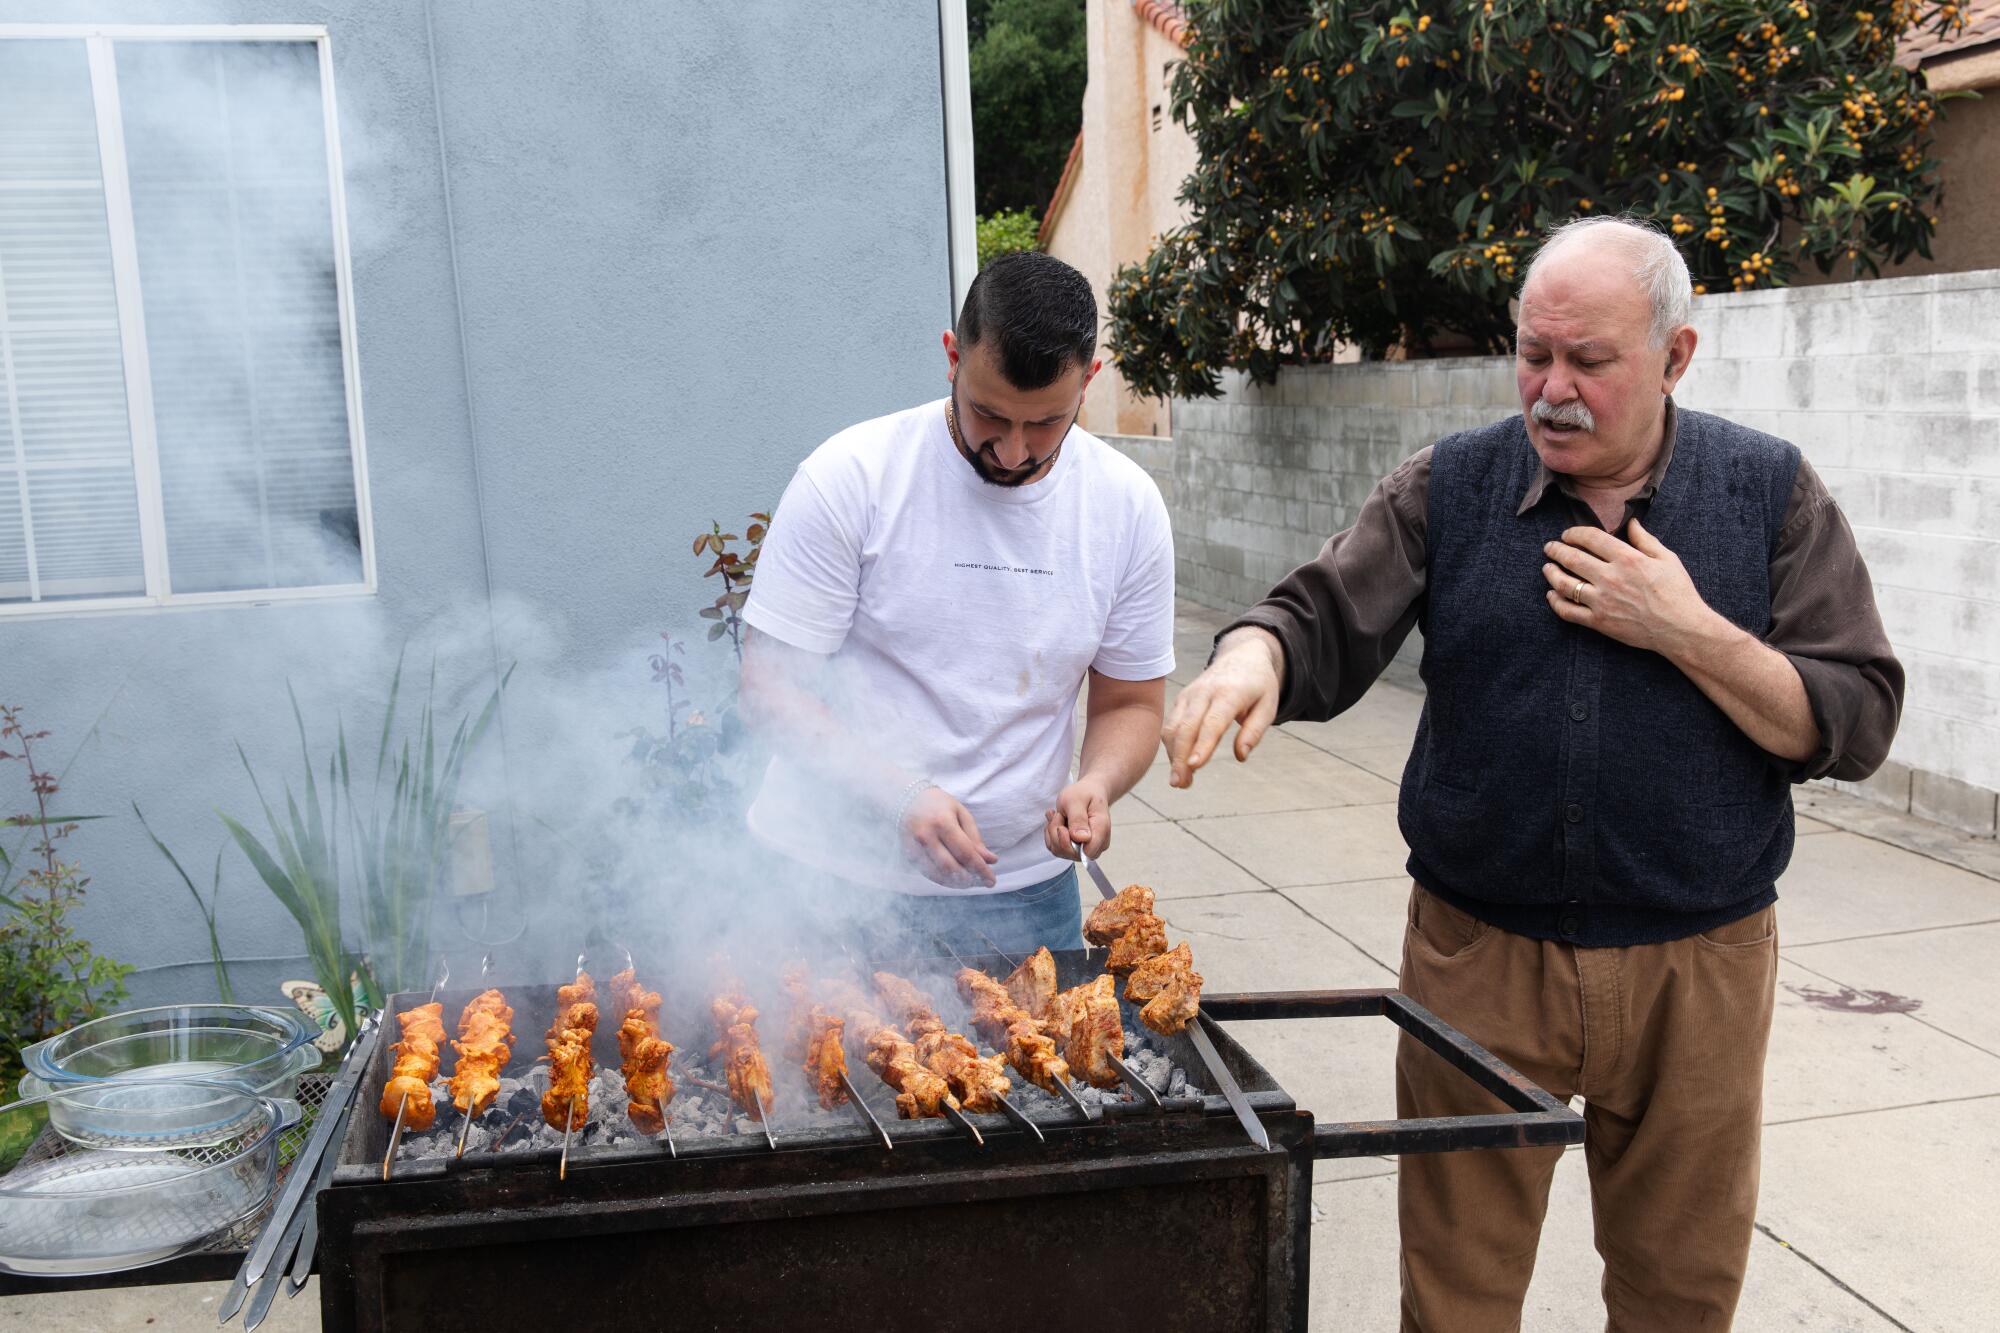 Alex Khachoyan and son Harout work the grill at Alex's home.